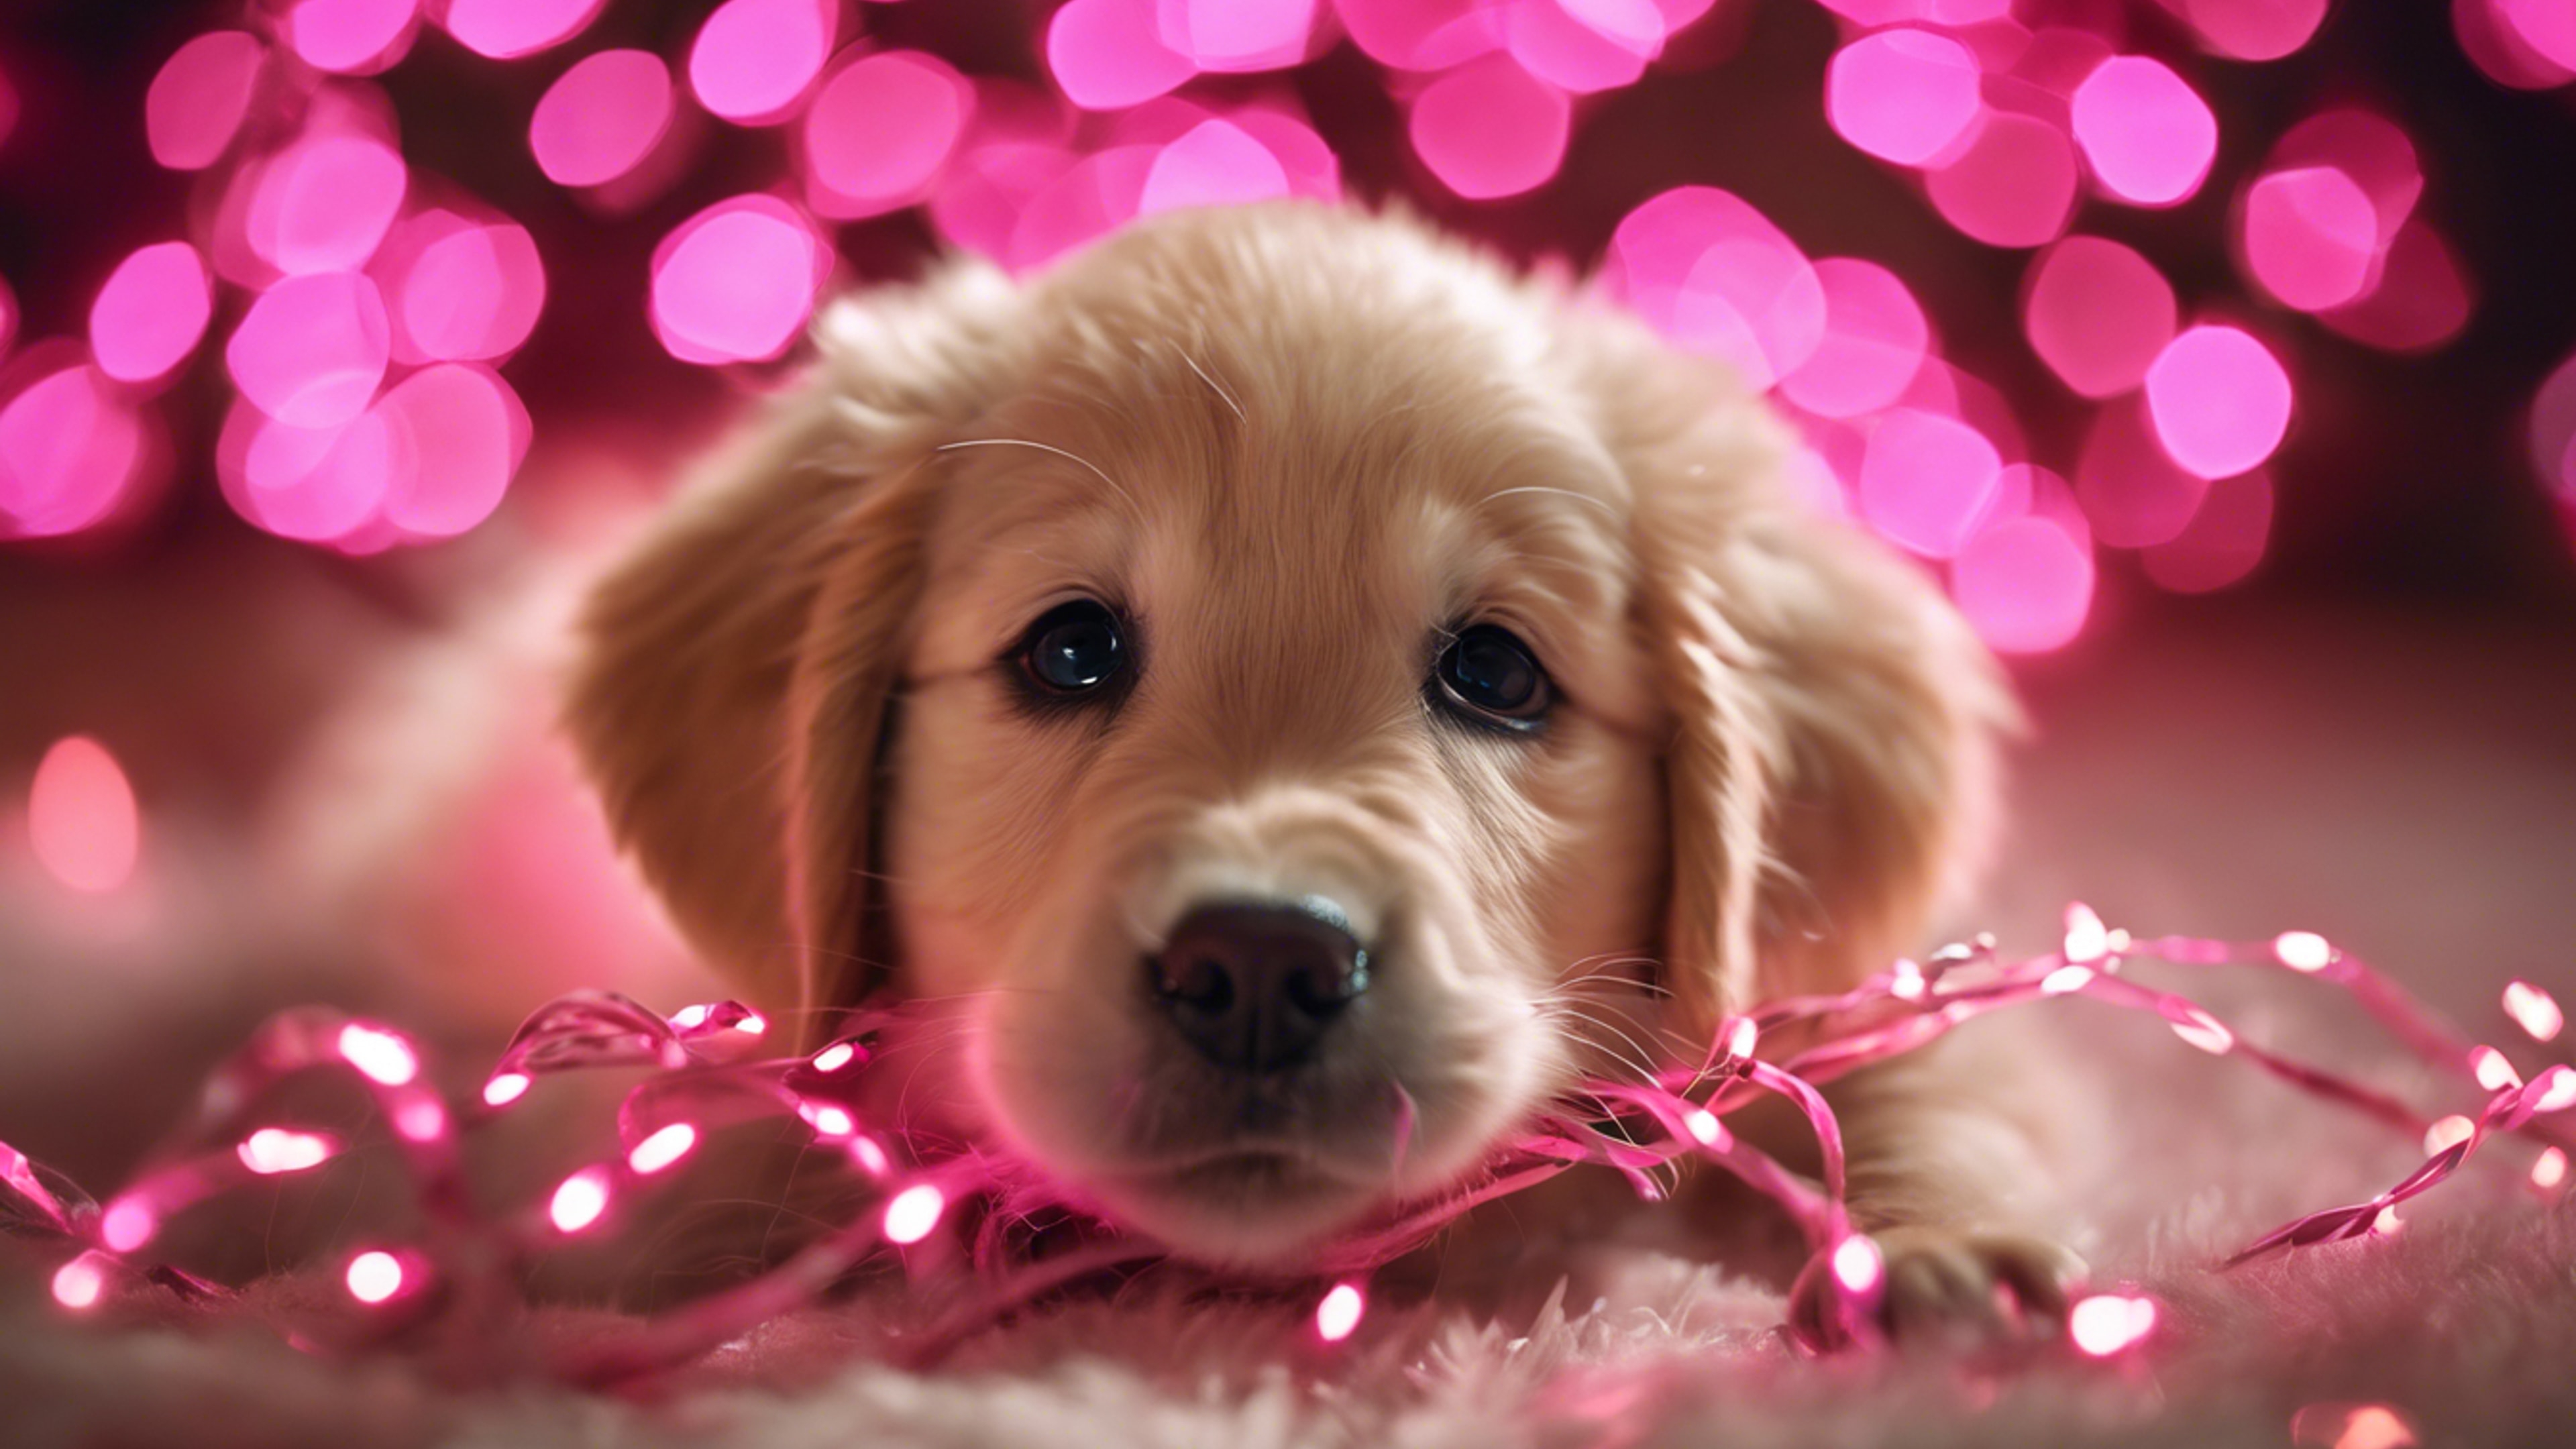 A golden retriever puppy adorably tangled in pink Christmas lights. Wallpaper[26994d3815c0460ab11e]